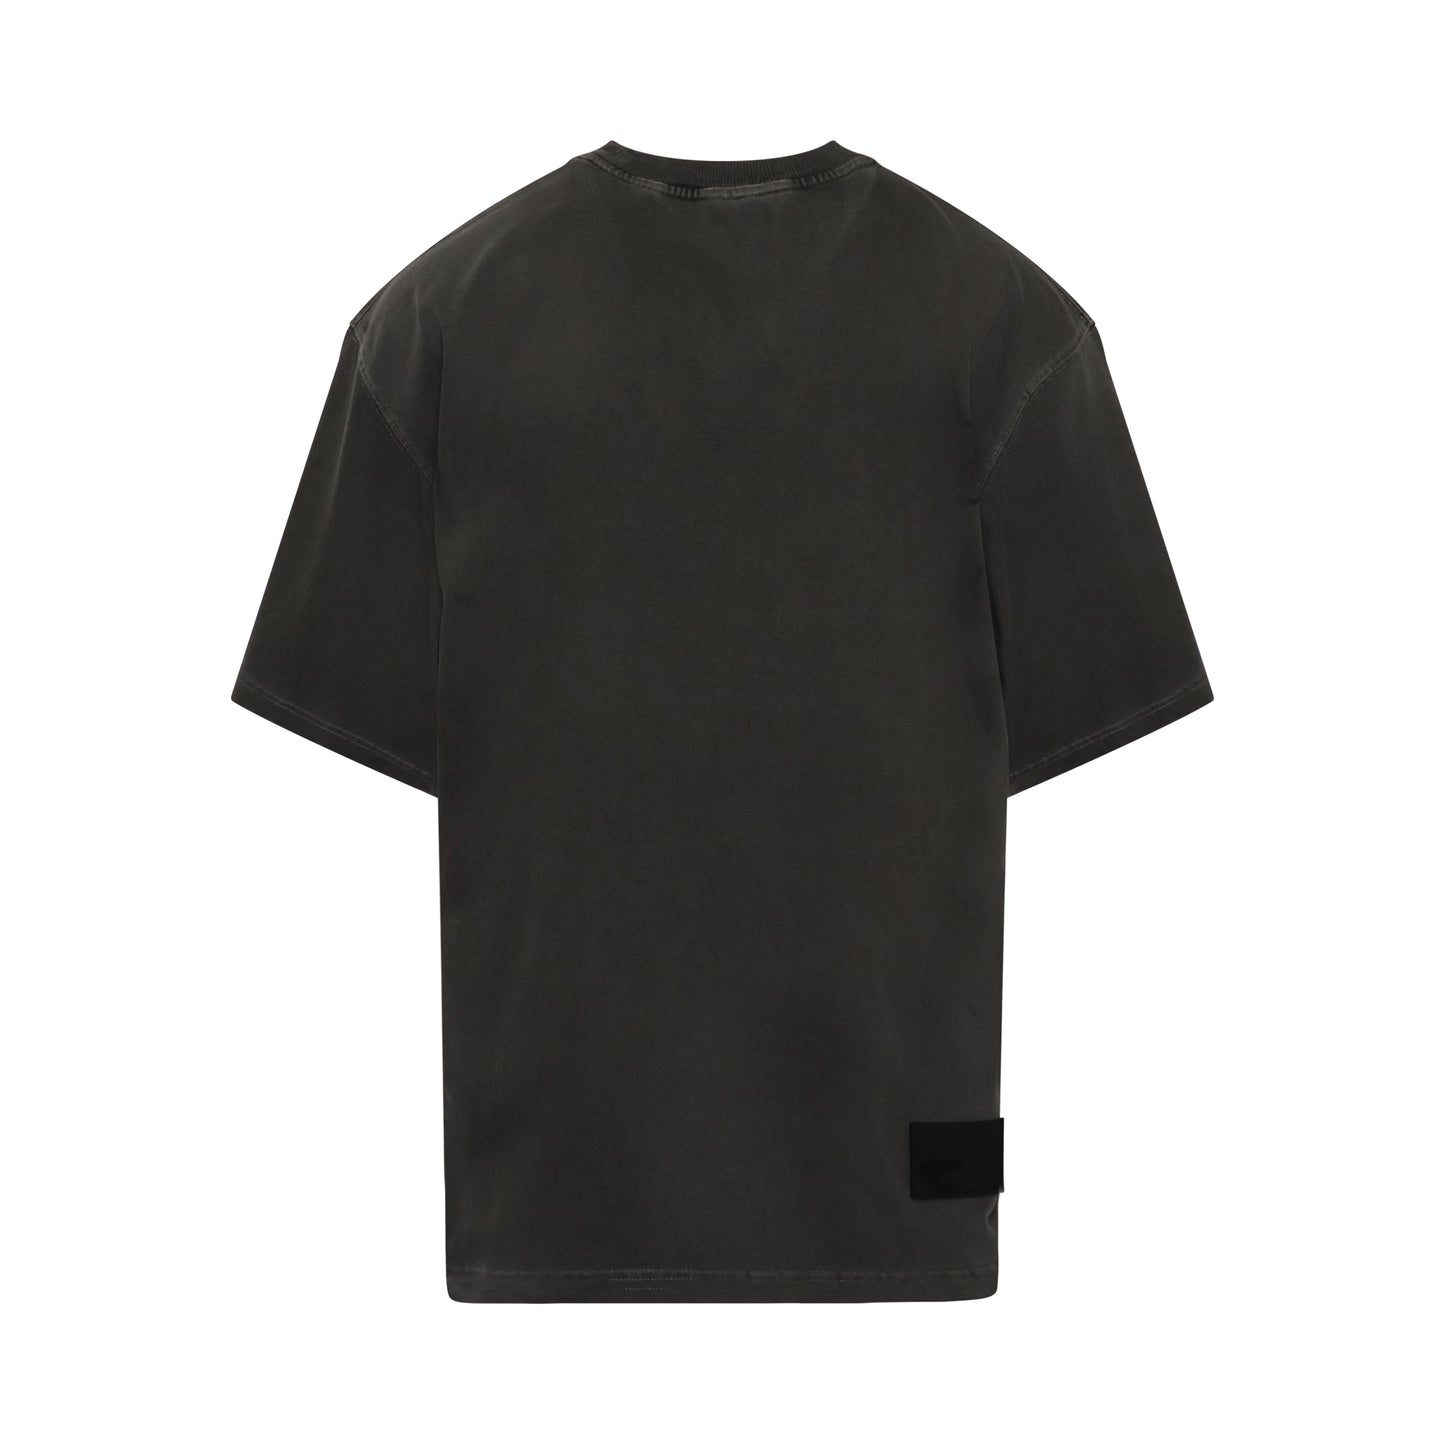 Classic Embroidered Logo T-Shirt in Charcoal